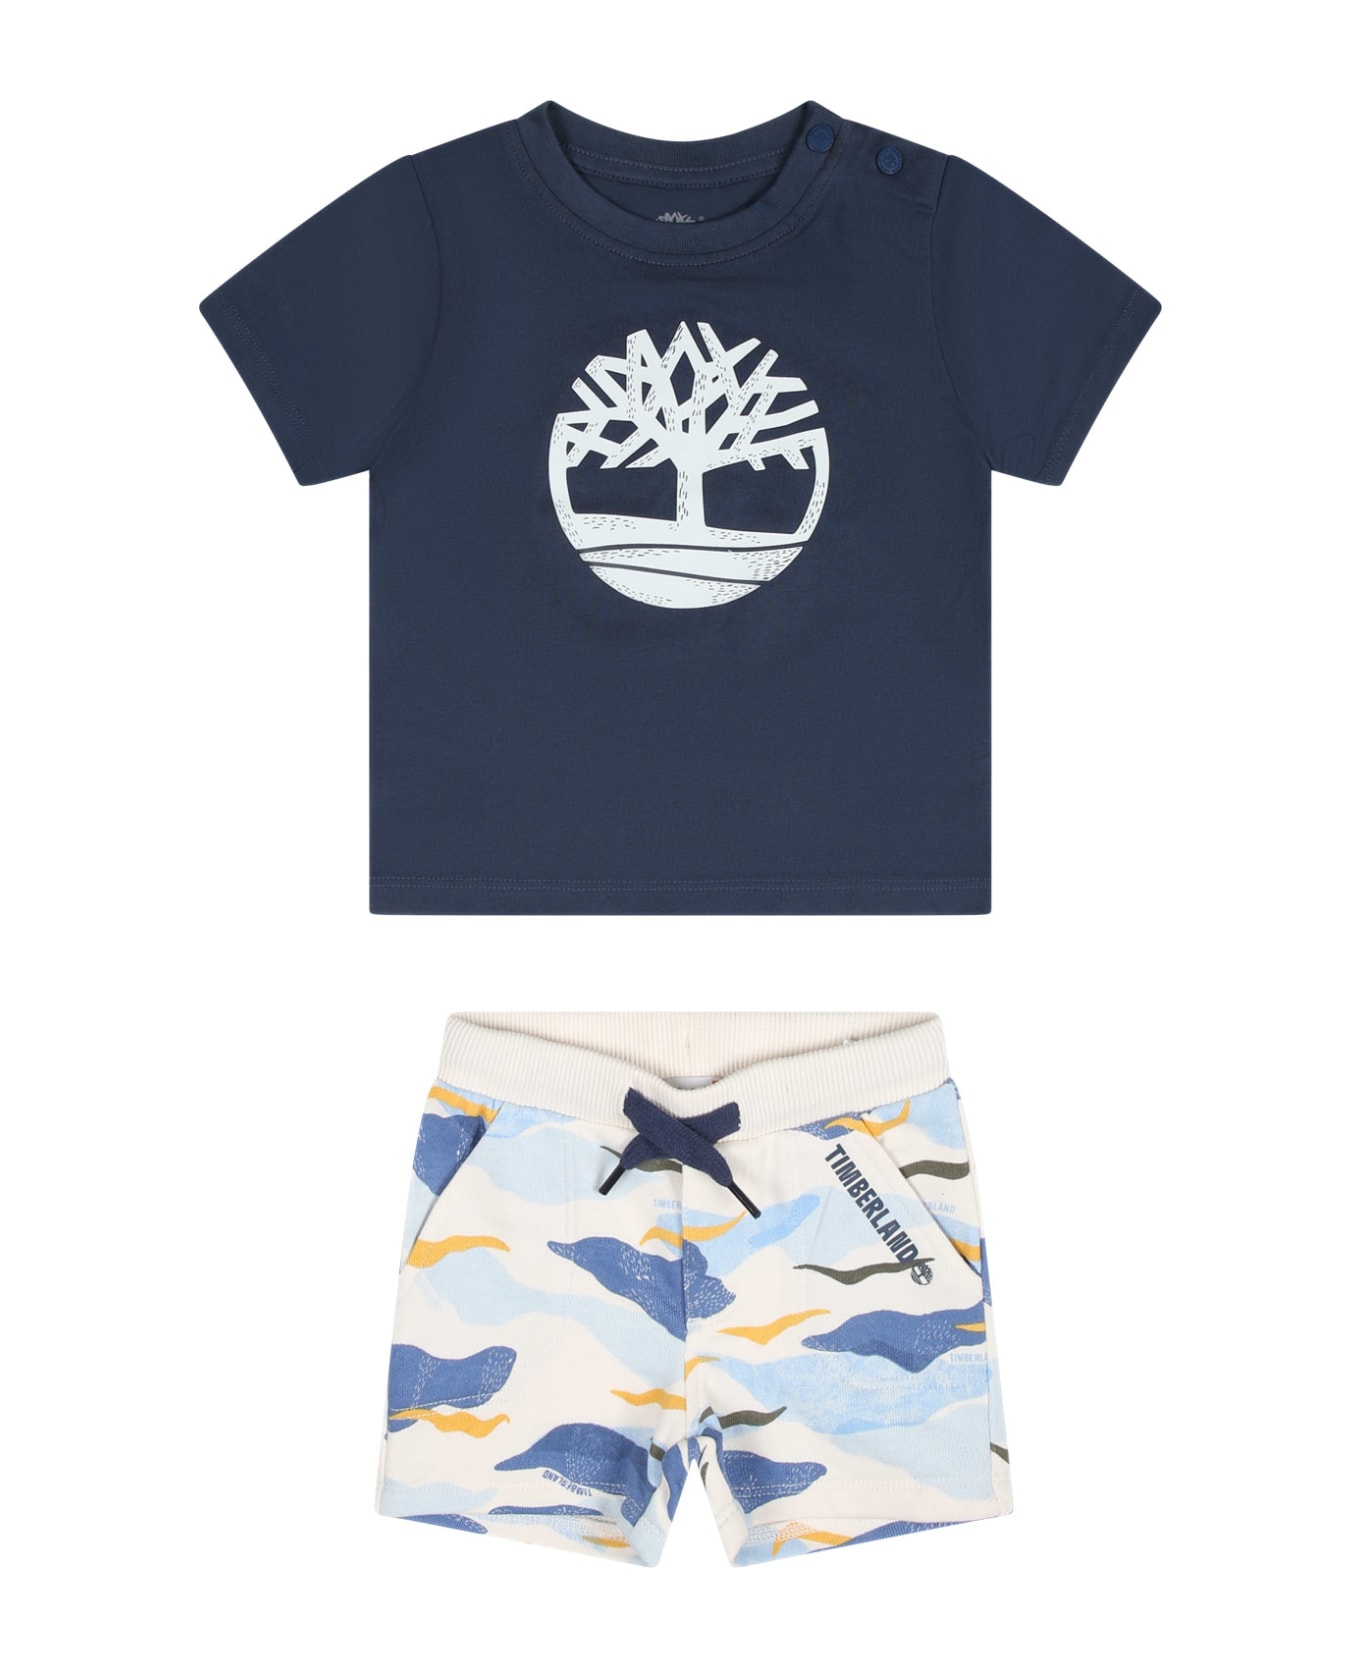 Timberland Blue Set For Baby Boy With Logo - Blue